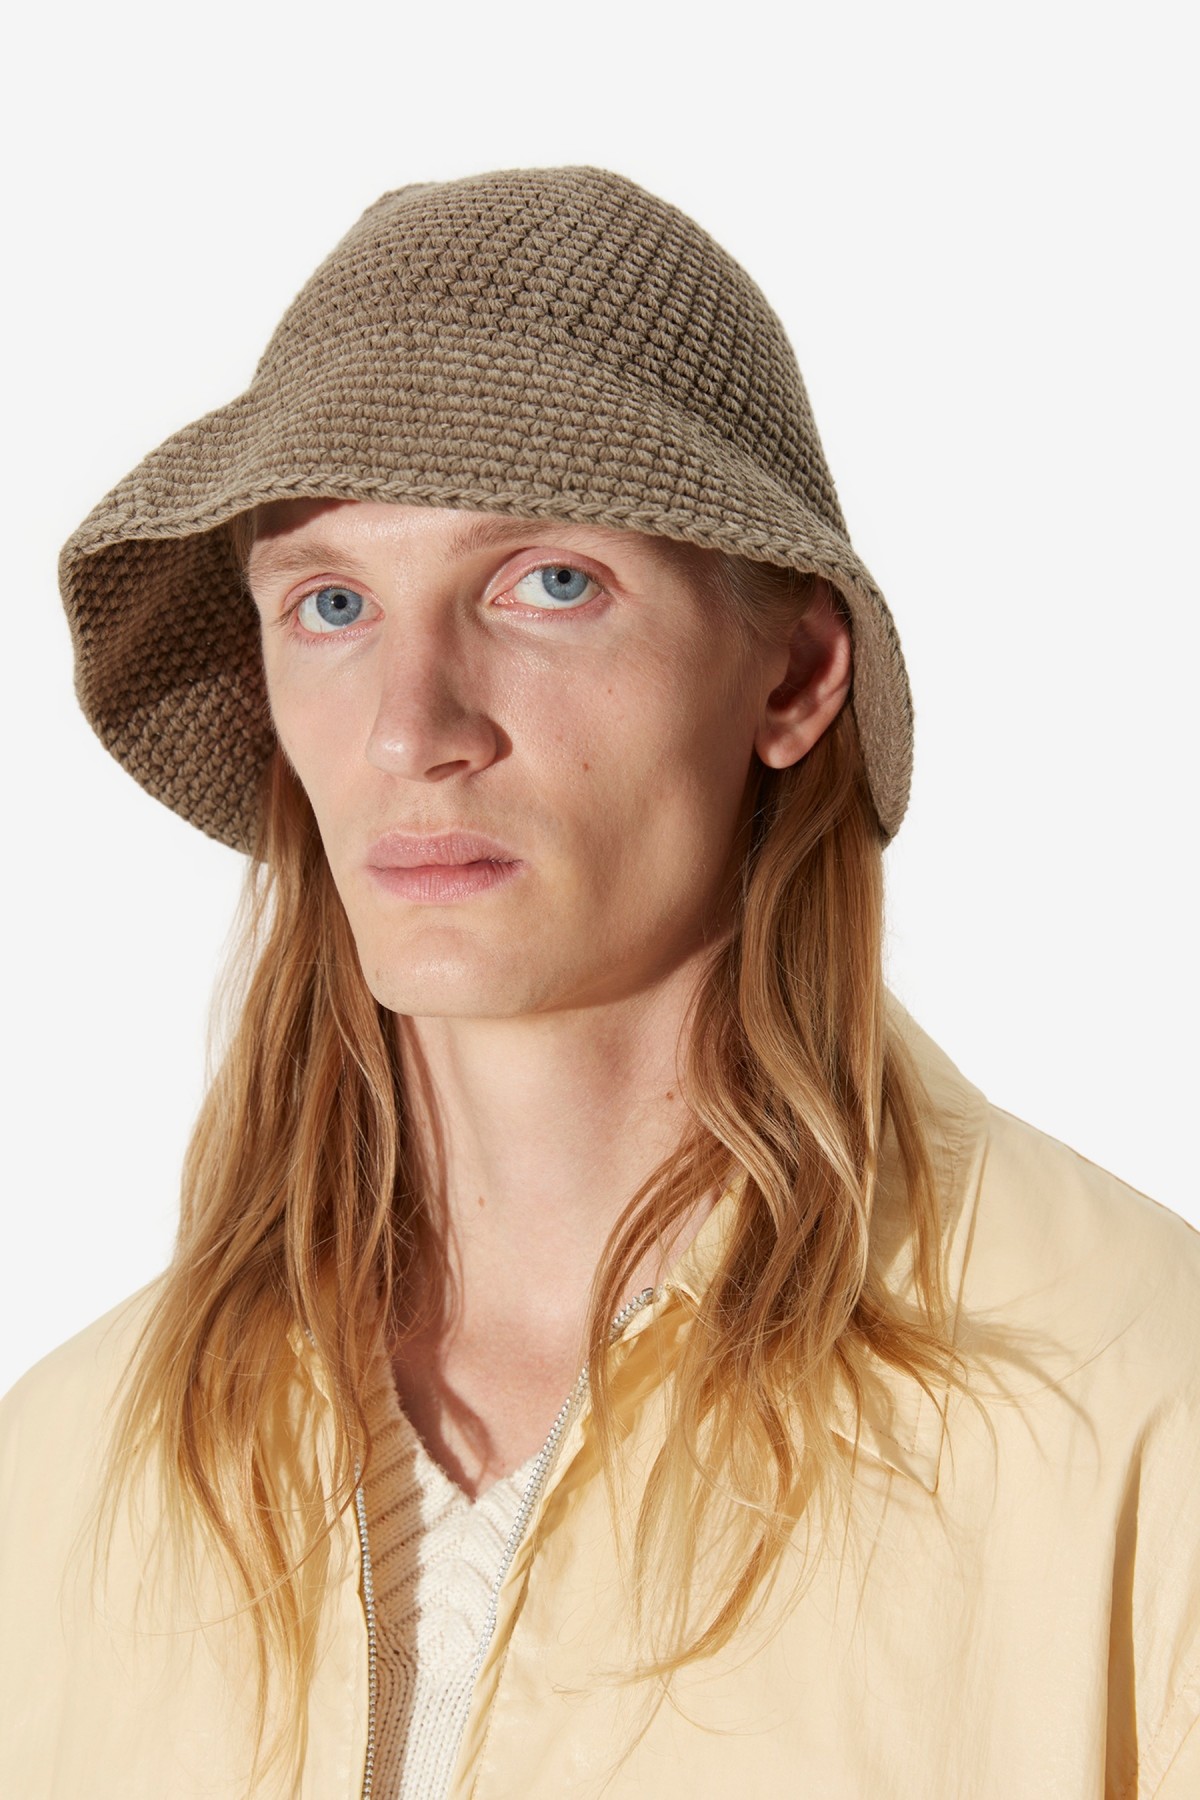 Our Legacy Tom Tom Hat in Uniform Olive Tousled Cotton